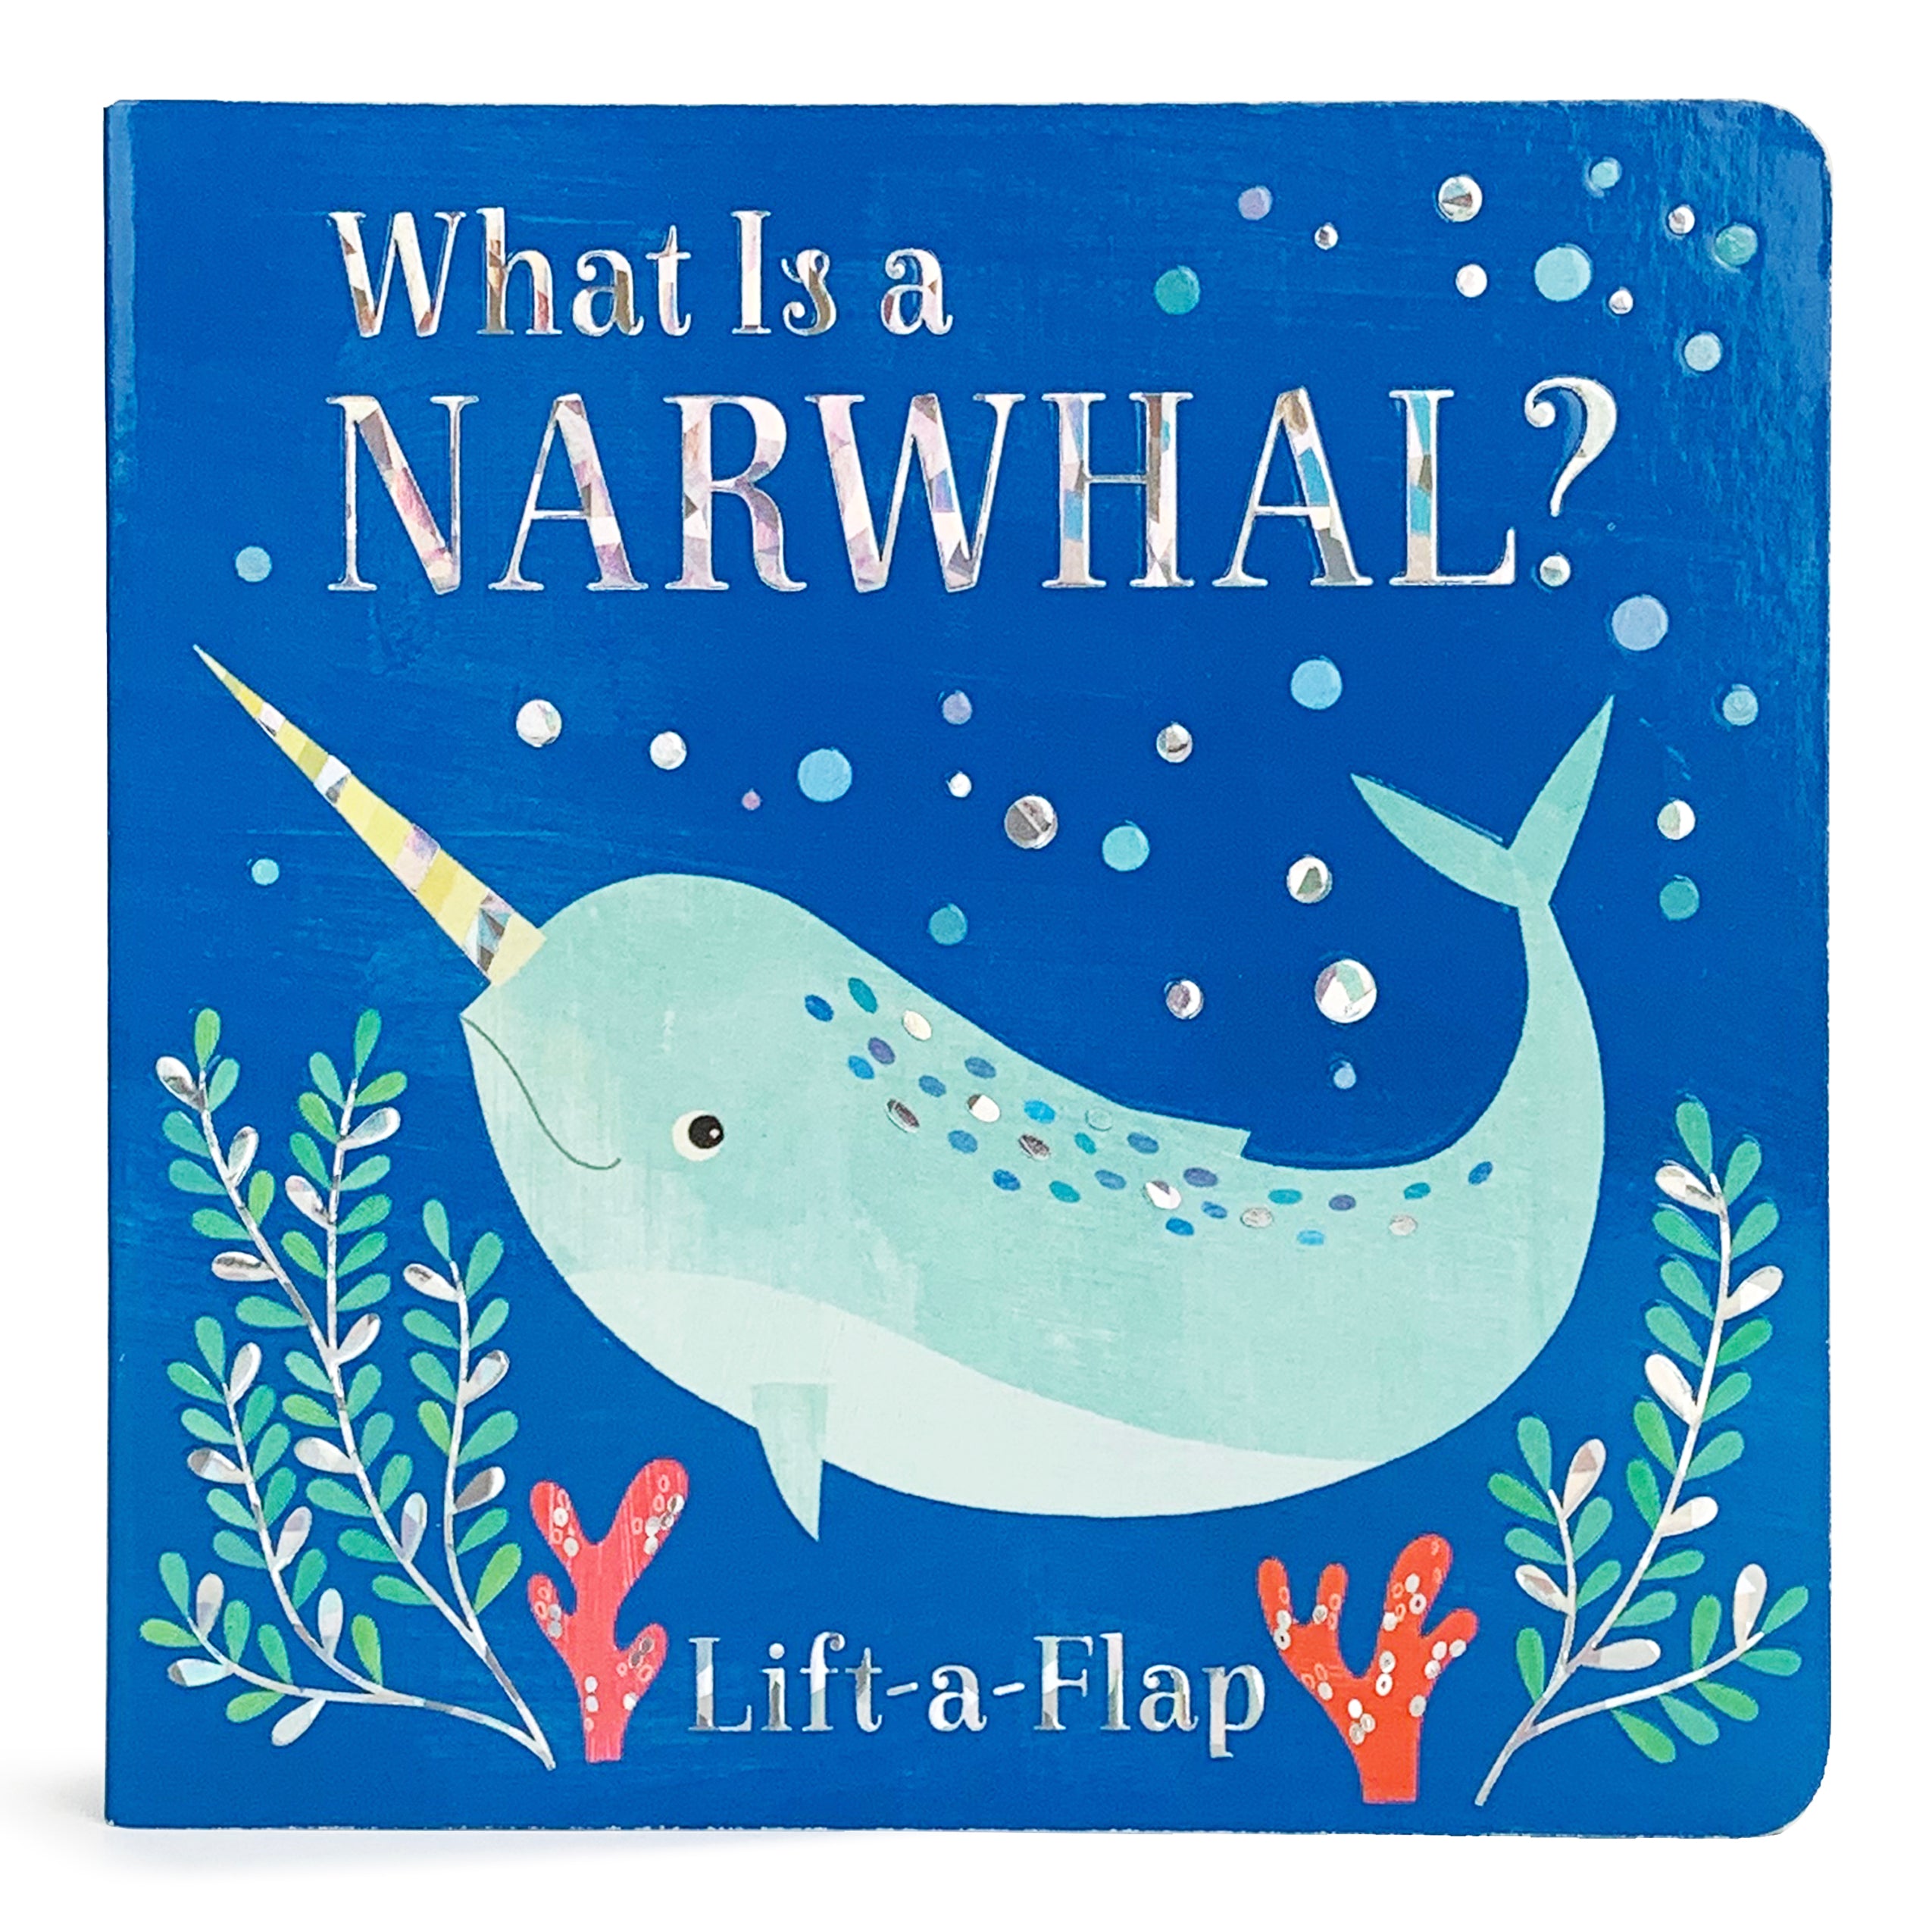 Unicorn of the Sea: Narwhal Facts, Stories